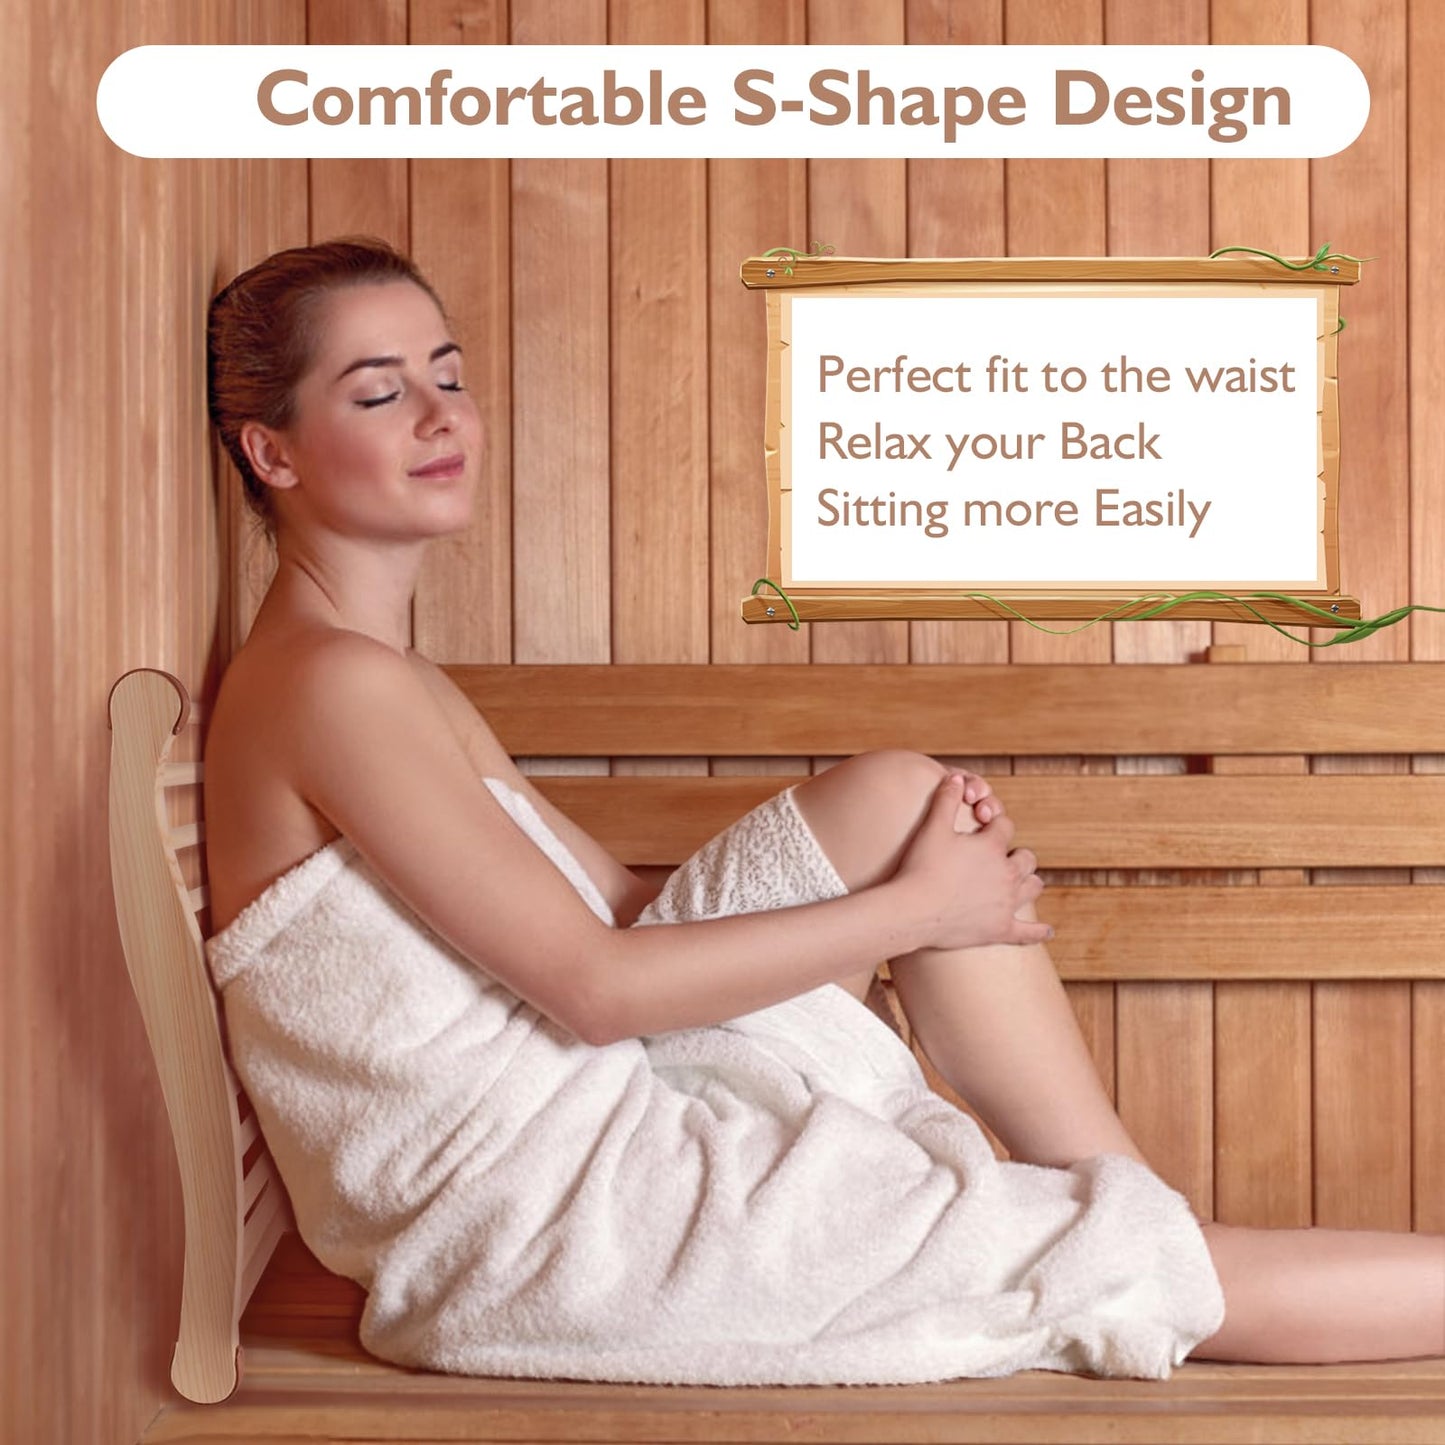 Wiiyita 2 Pack Sauna Backrest Sauna Accessories Wooden Slip-Resistant Non-Toxic Comfortable S-Shape Design Sauna Chair with Back, Sauna Accessories for Any Barrel or Infrared Sauna